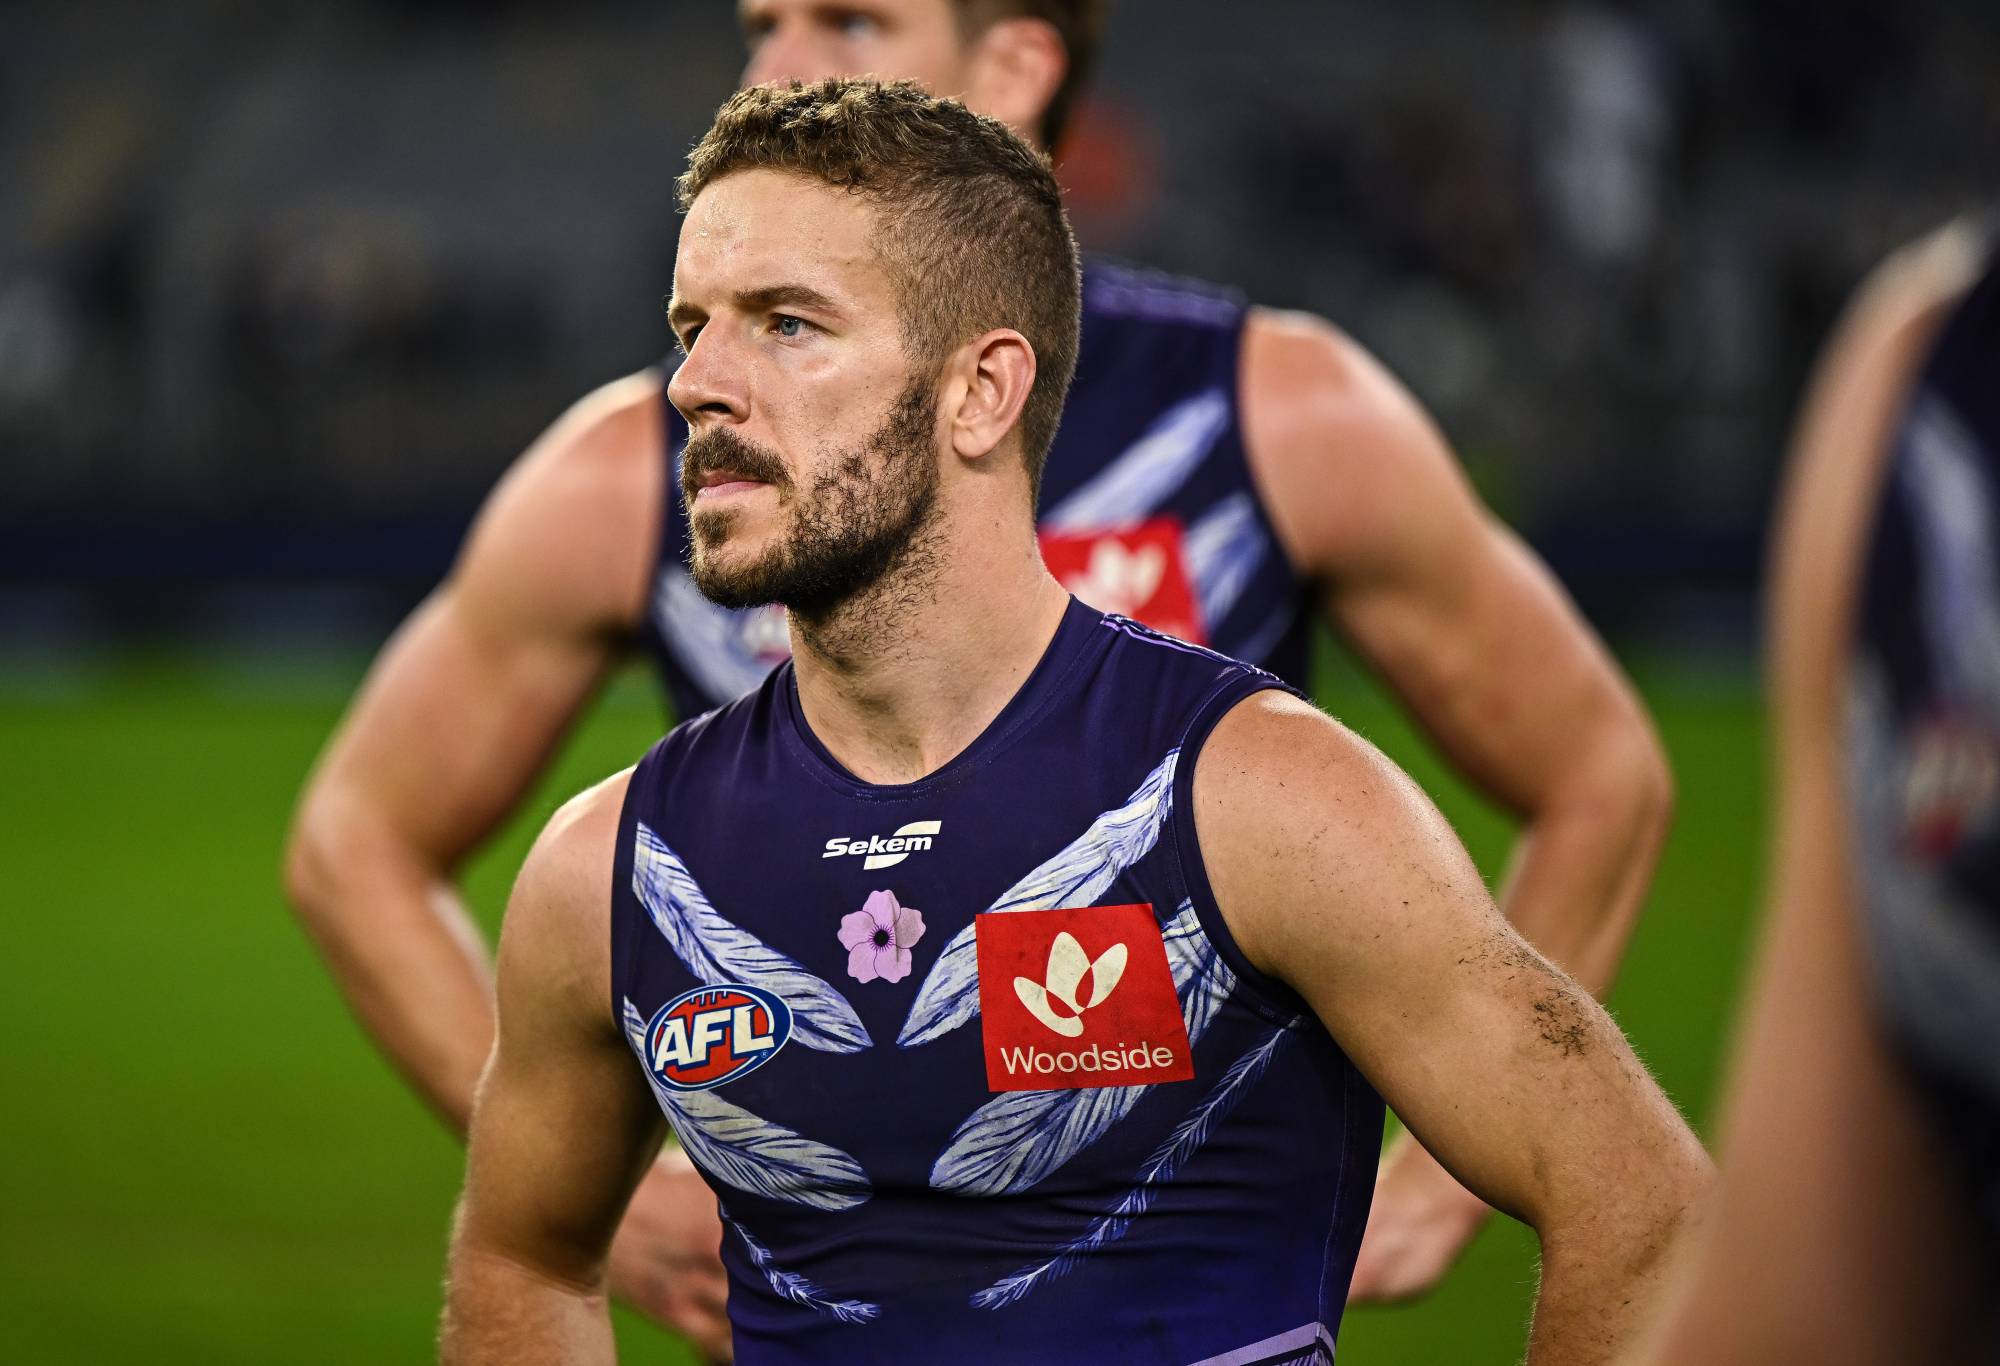 PERTH, AUSTRALIA - MAY 22: Sam Switkowski of the Dockers looks dejected after a loss during the 2022 AFL Round 10 match between the Fremantle Dockers and the Collingwood Magpies at Optus Stadium on May 22, 2022 in Perth, Australia. (Photo by Daniel Carson/AFL Photos via Getty Images)